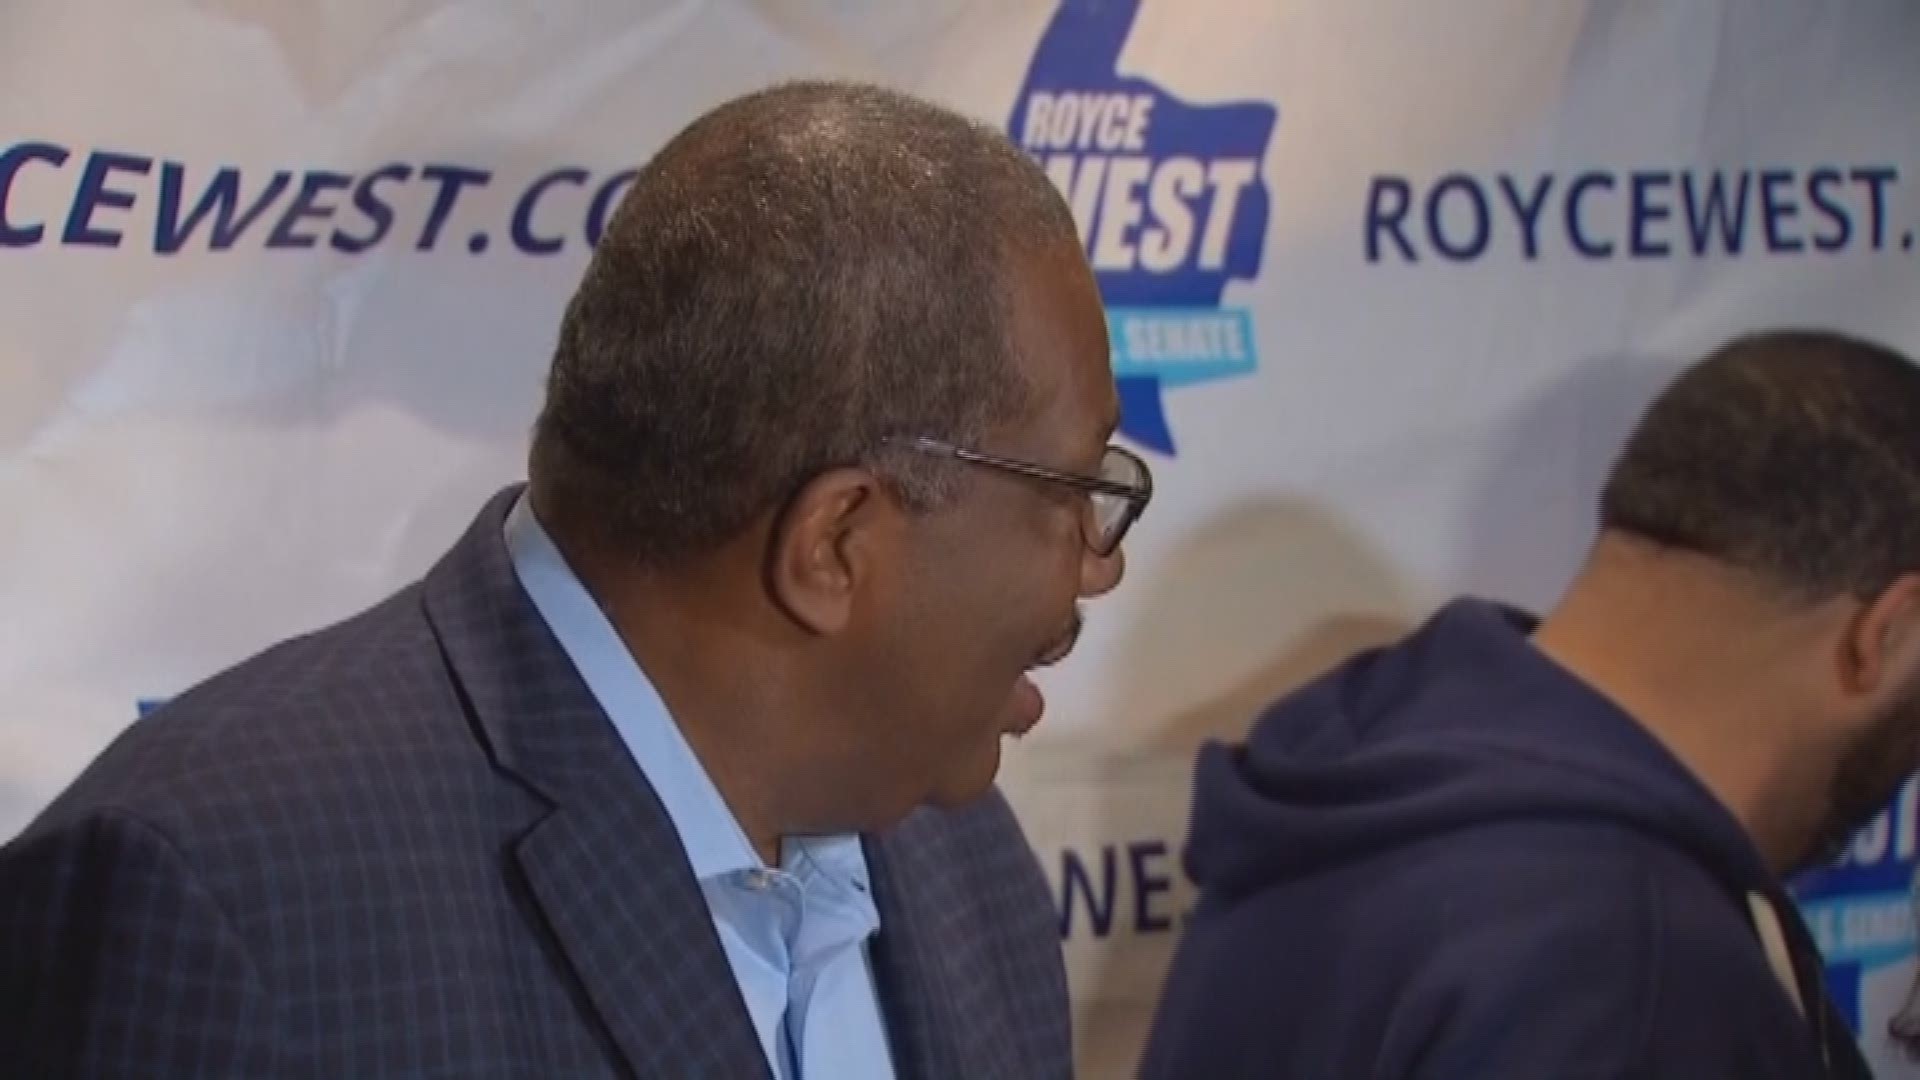 Royce West says to supporters he's confident he'll be in the runoff for the Democratic primary for the U.S. Senate.